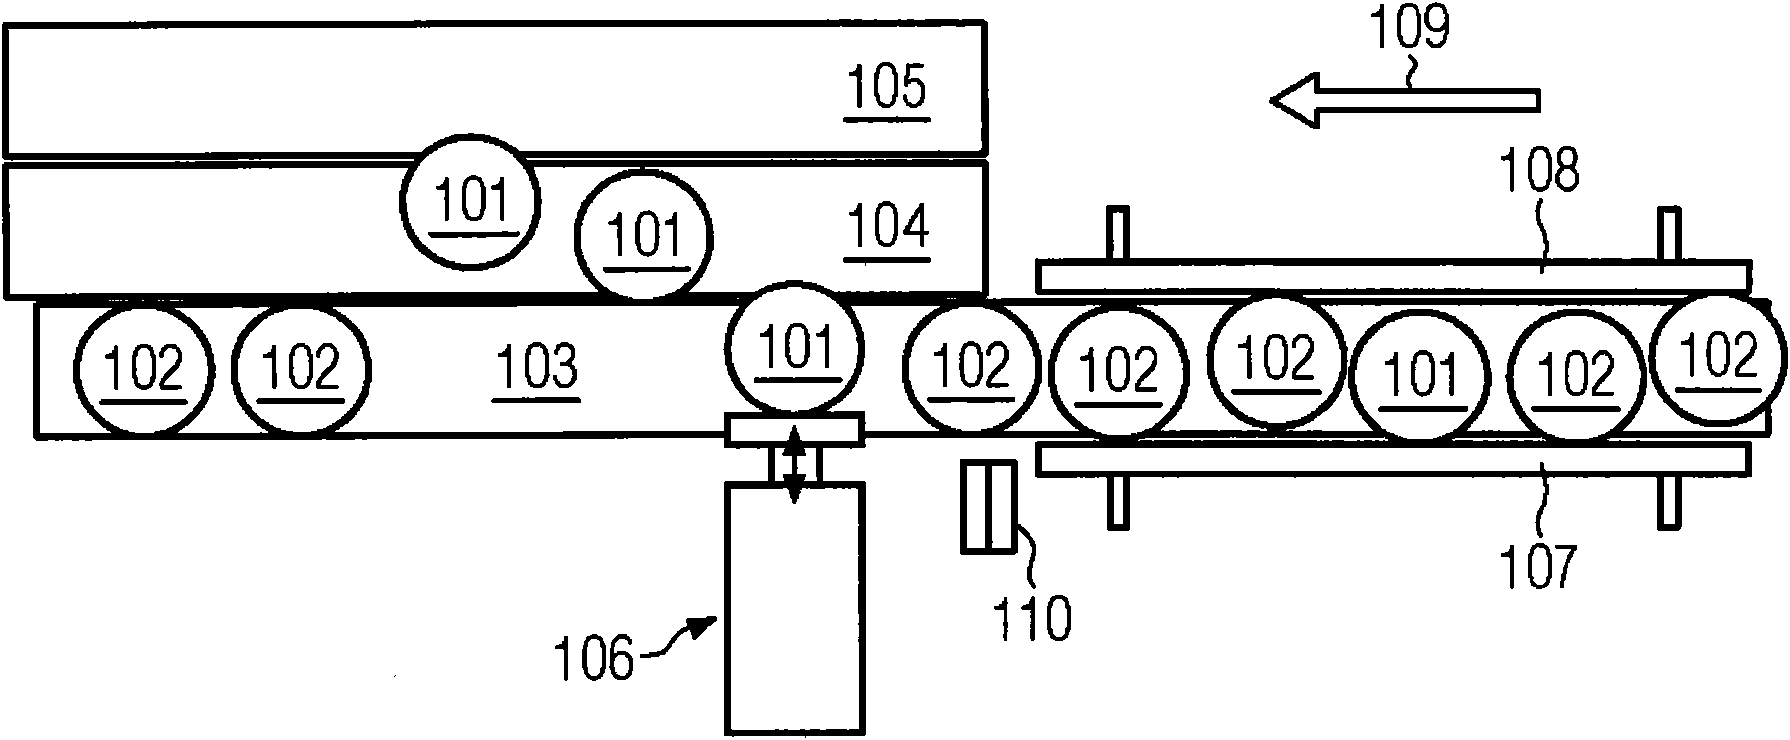 Method and apparatus for monitoring the deviation of an object from a sequence and corresponding control system